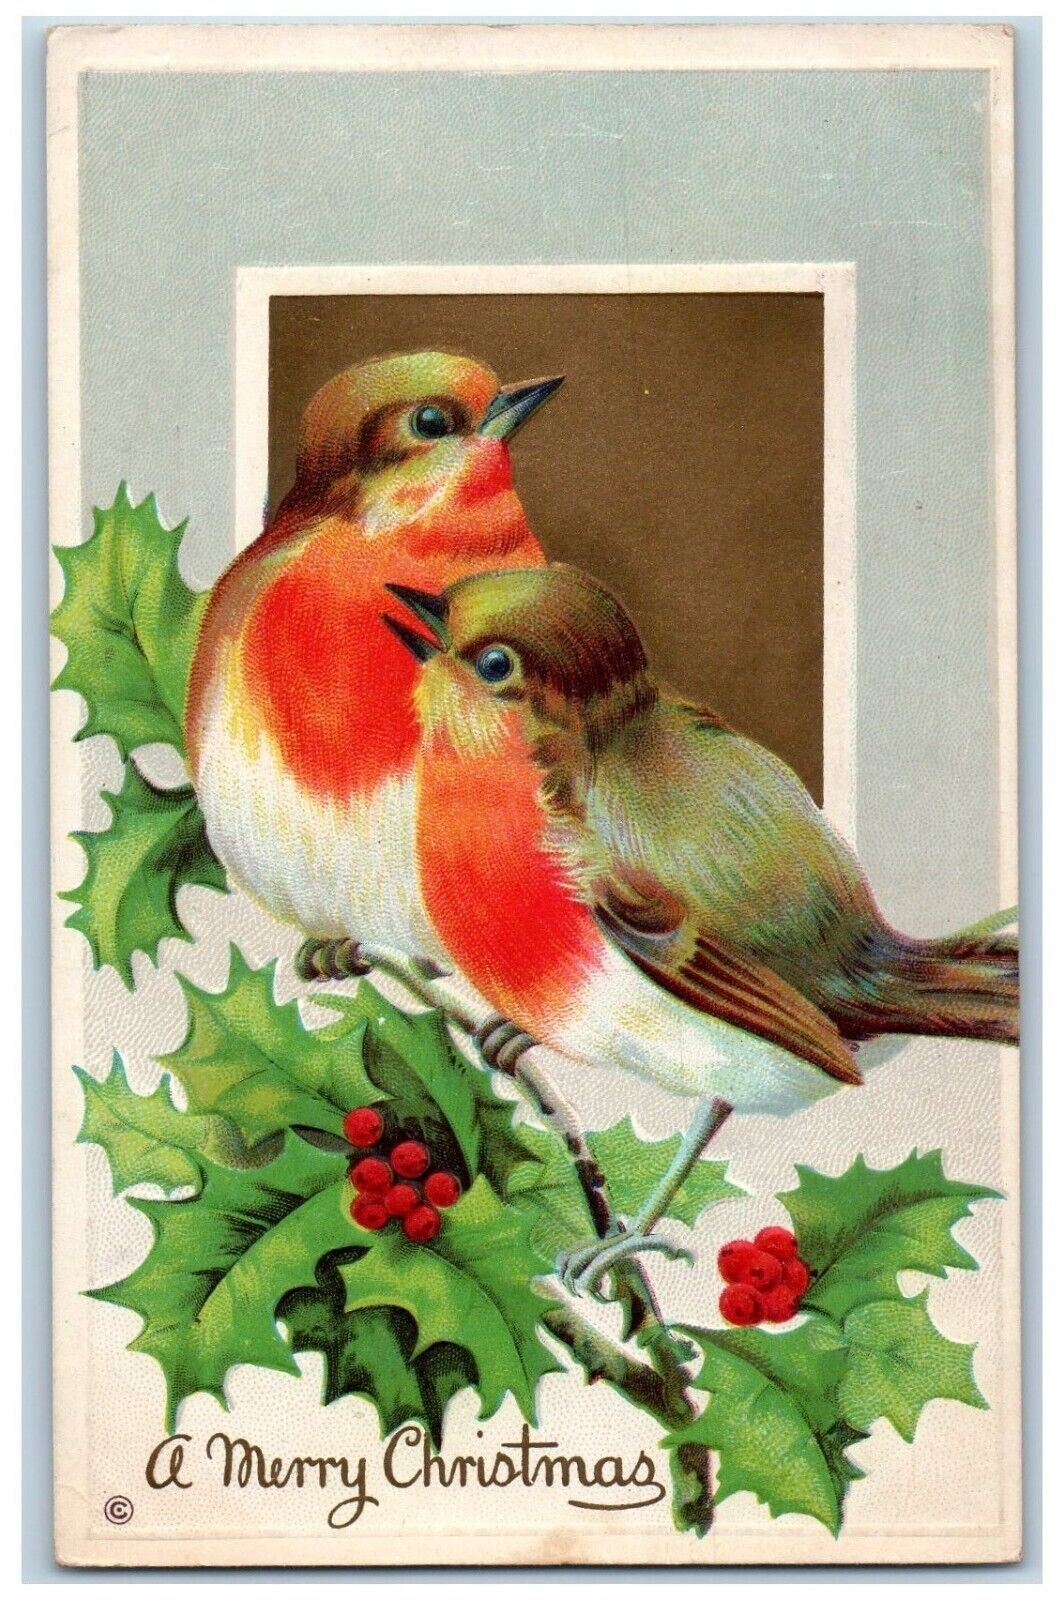 DPO West Webster NY Postcard Christmas Song Birds Holly Berries Embossed 1910